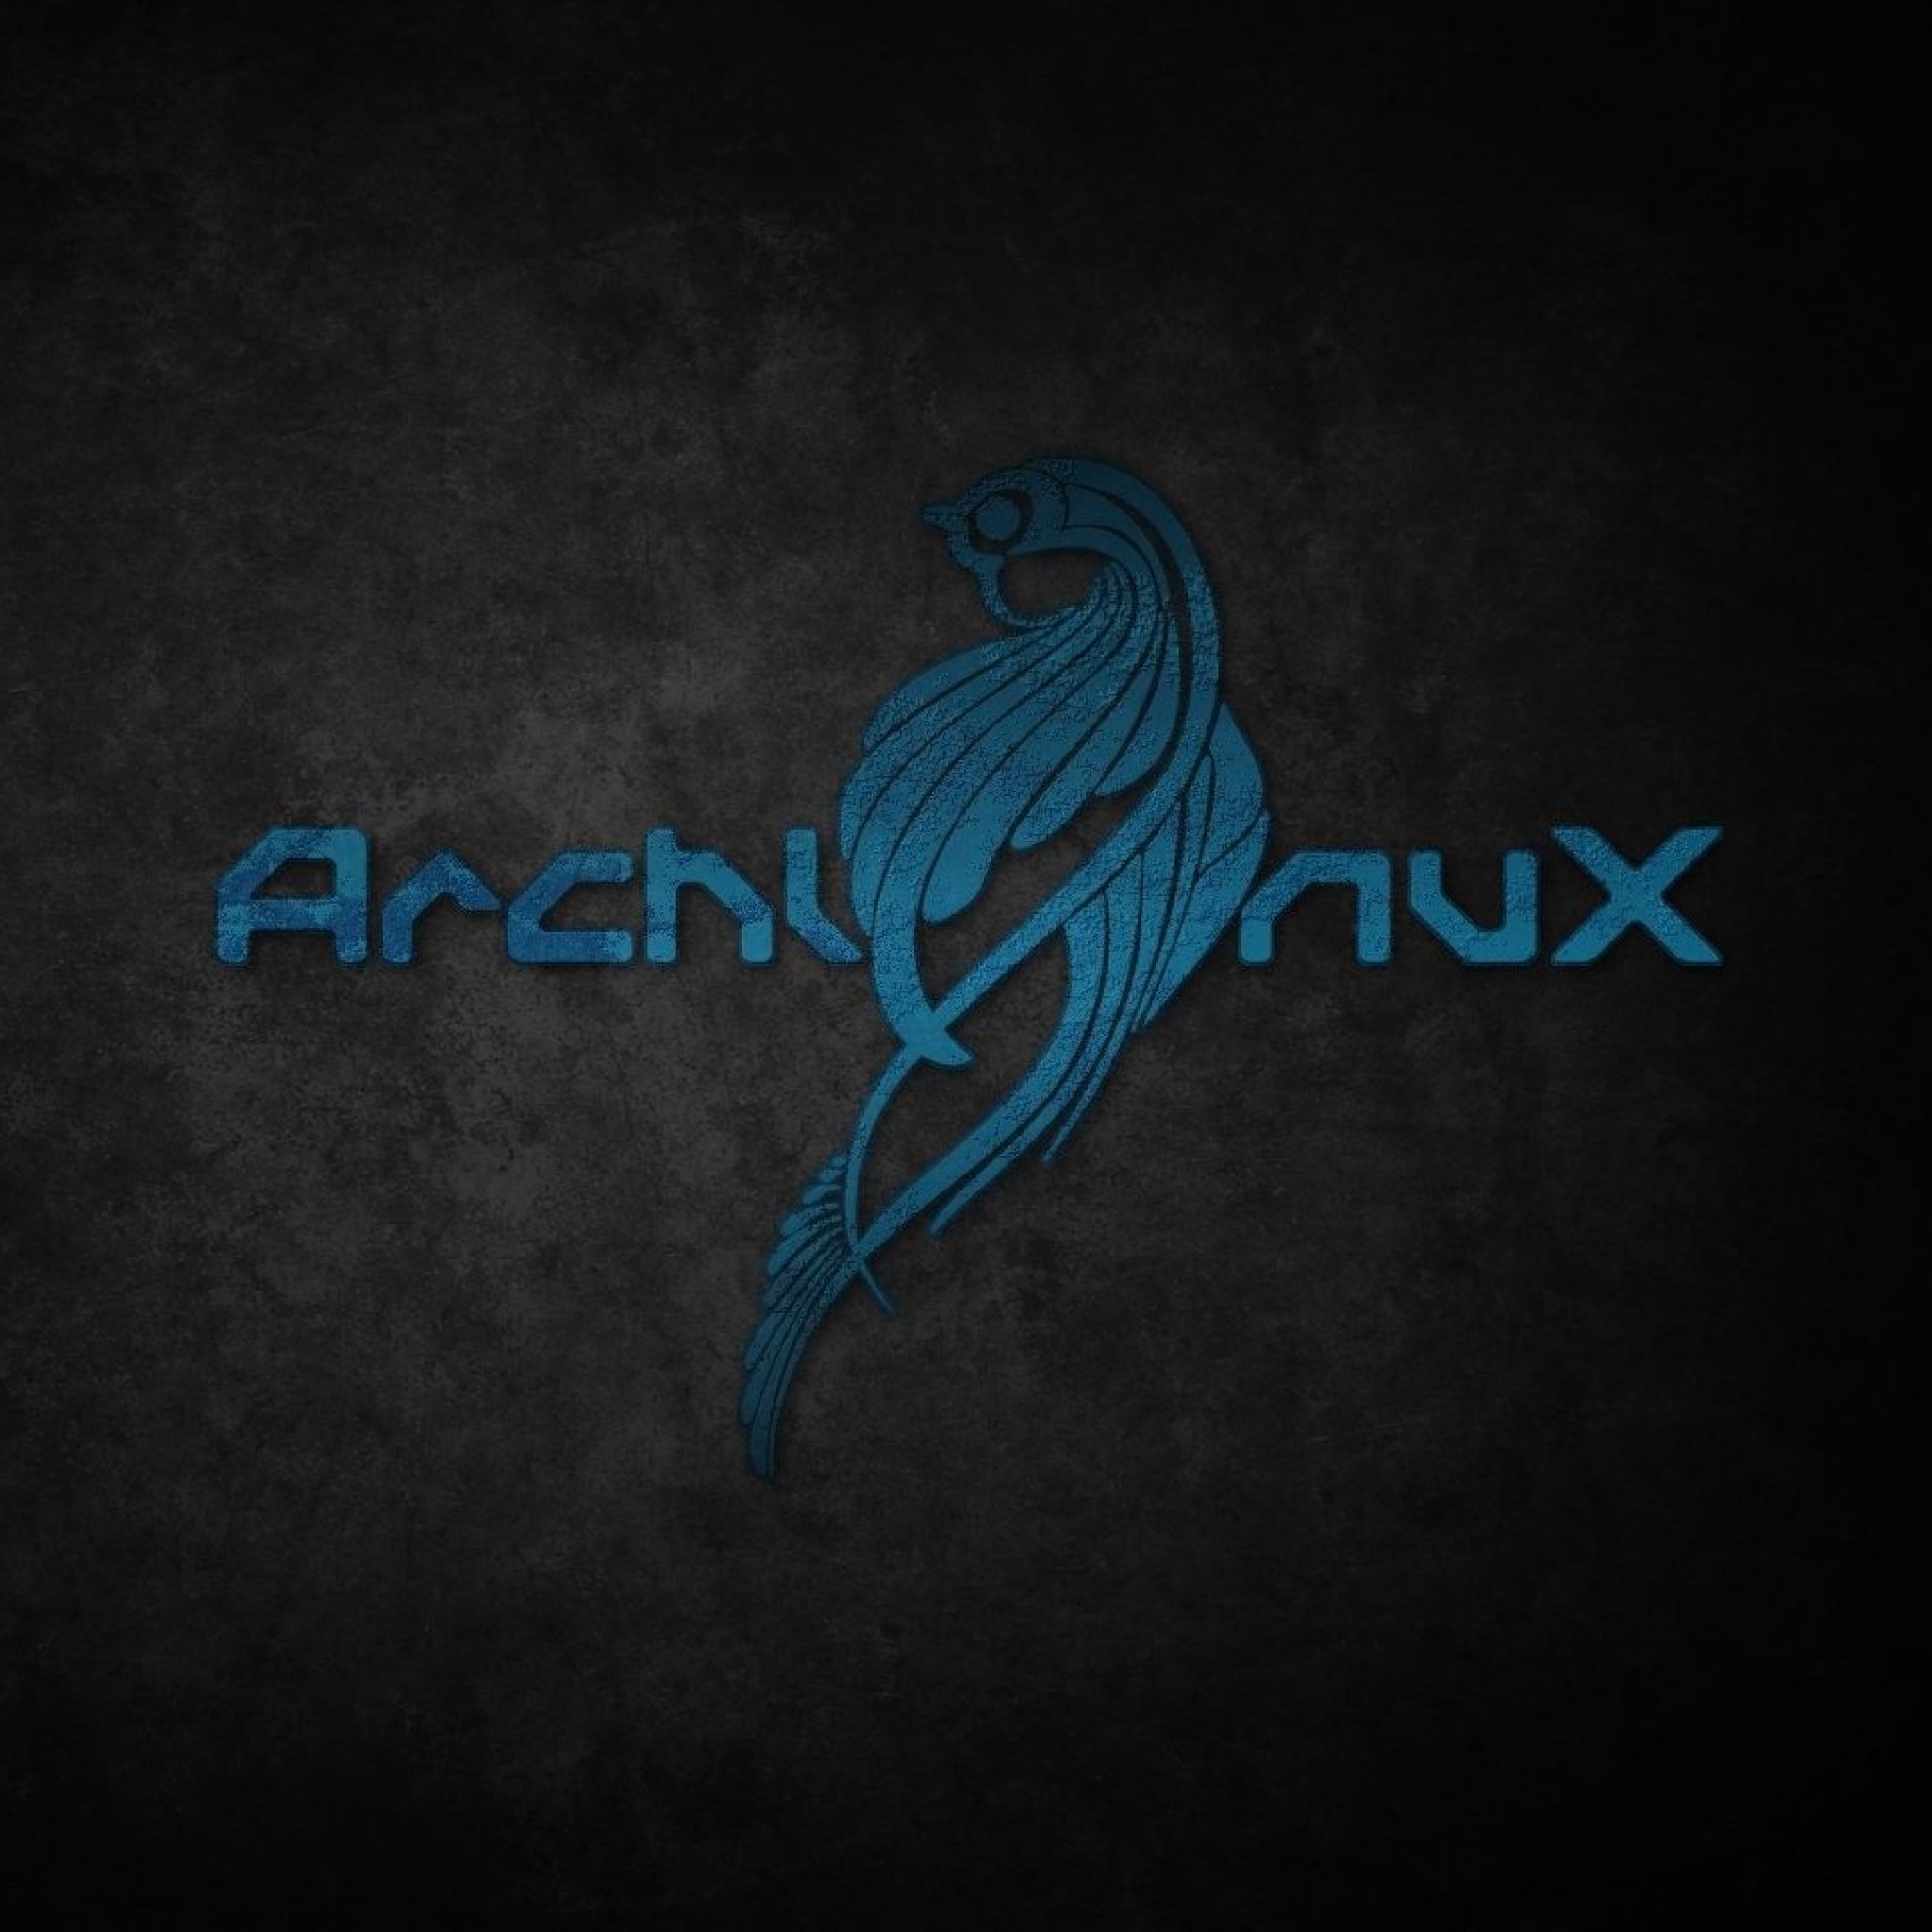 Linux Arch Gnu Linux Wallpaper 01 Wallpapers Pic Ipad タブレット壁紙ギャラリー